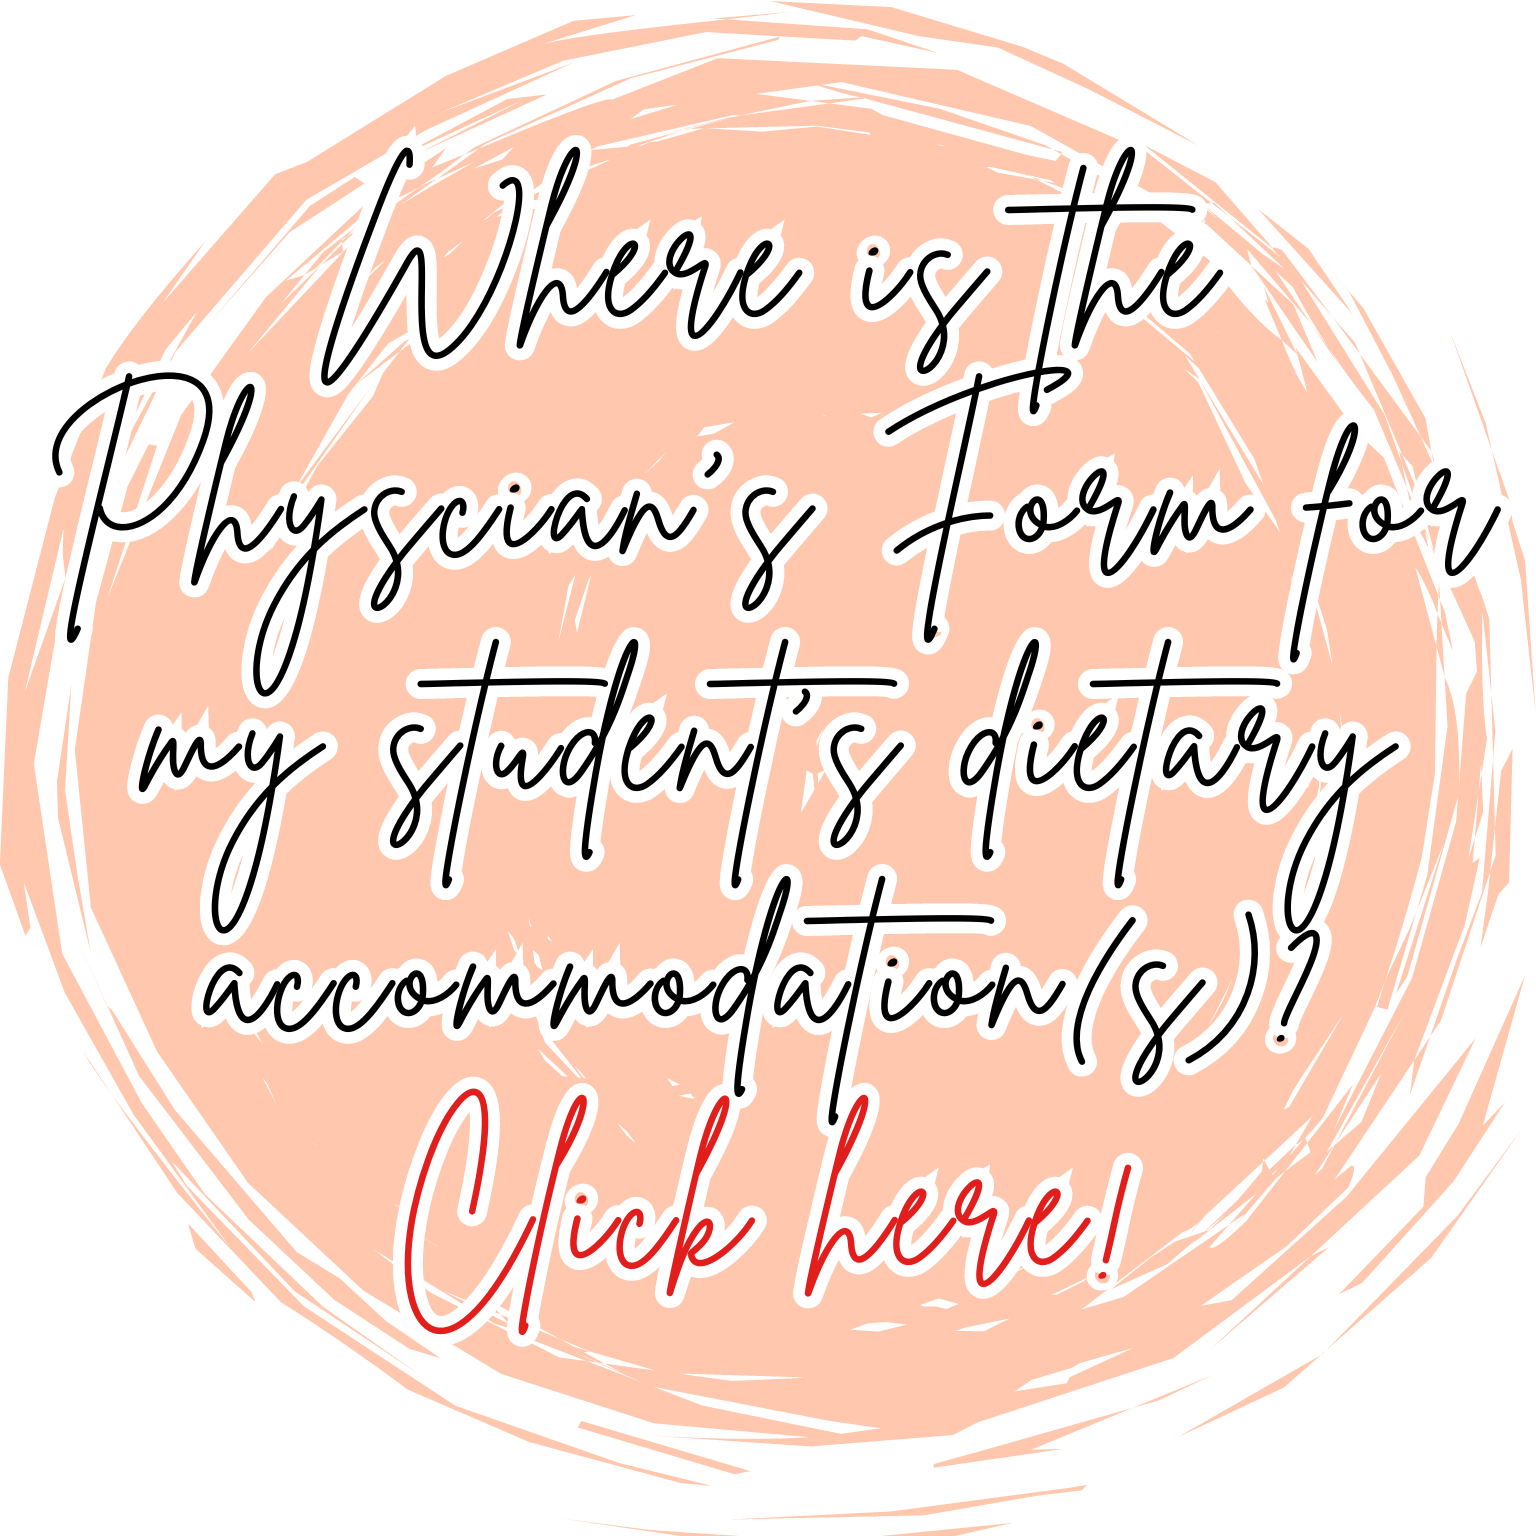 Where is the Physcian’s Form for my student’s dietary accommodation(s)? Click here!